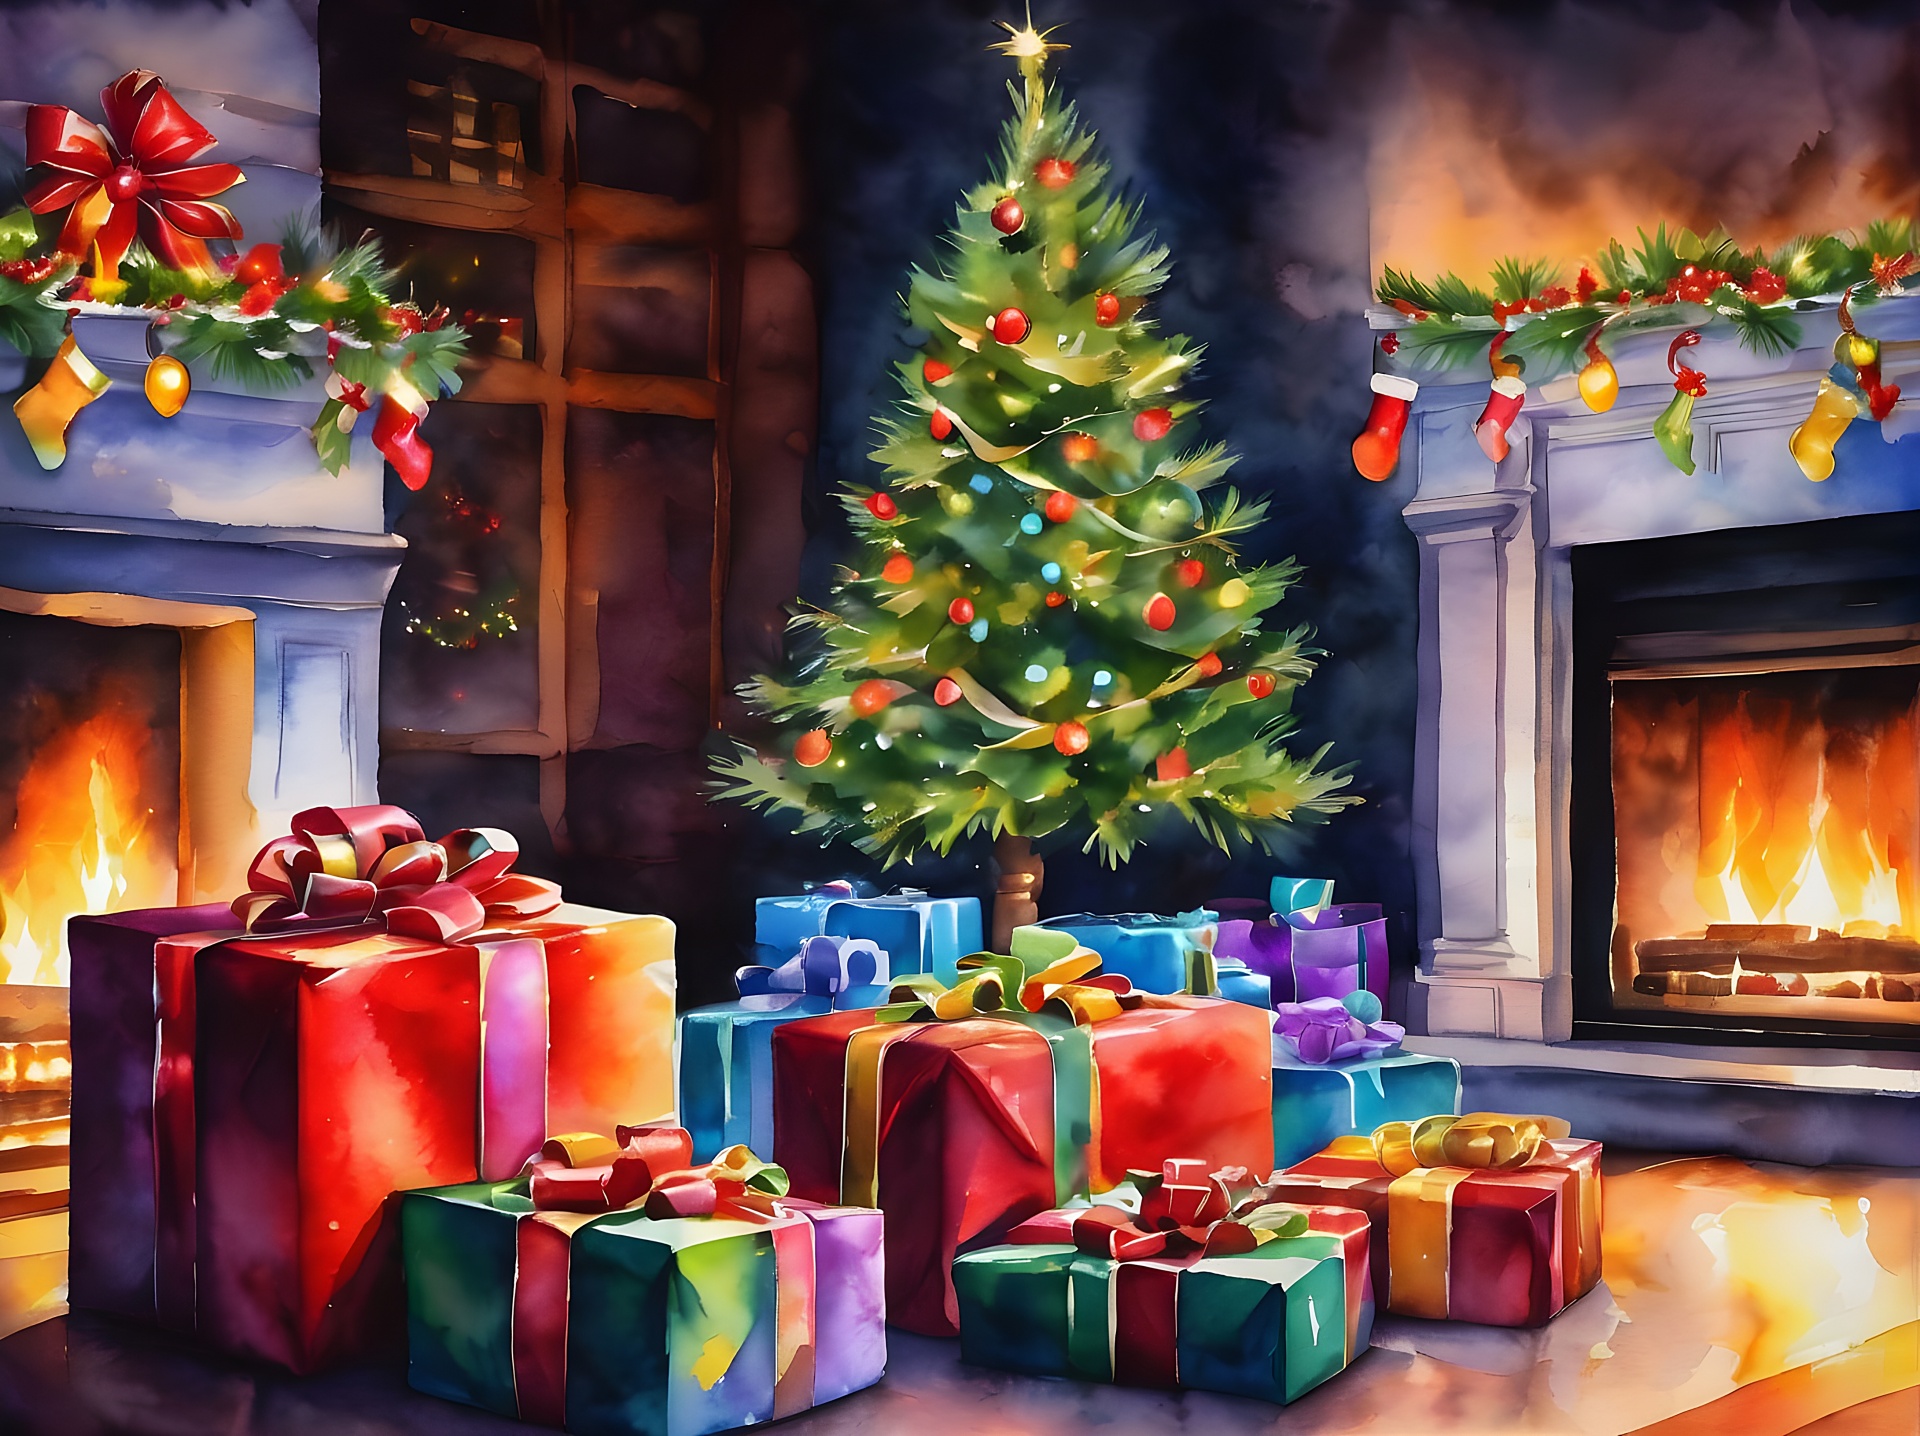 Fireplace Christmas Background Free Stock Photo - Public Domain Pictures